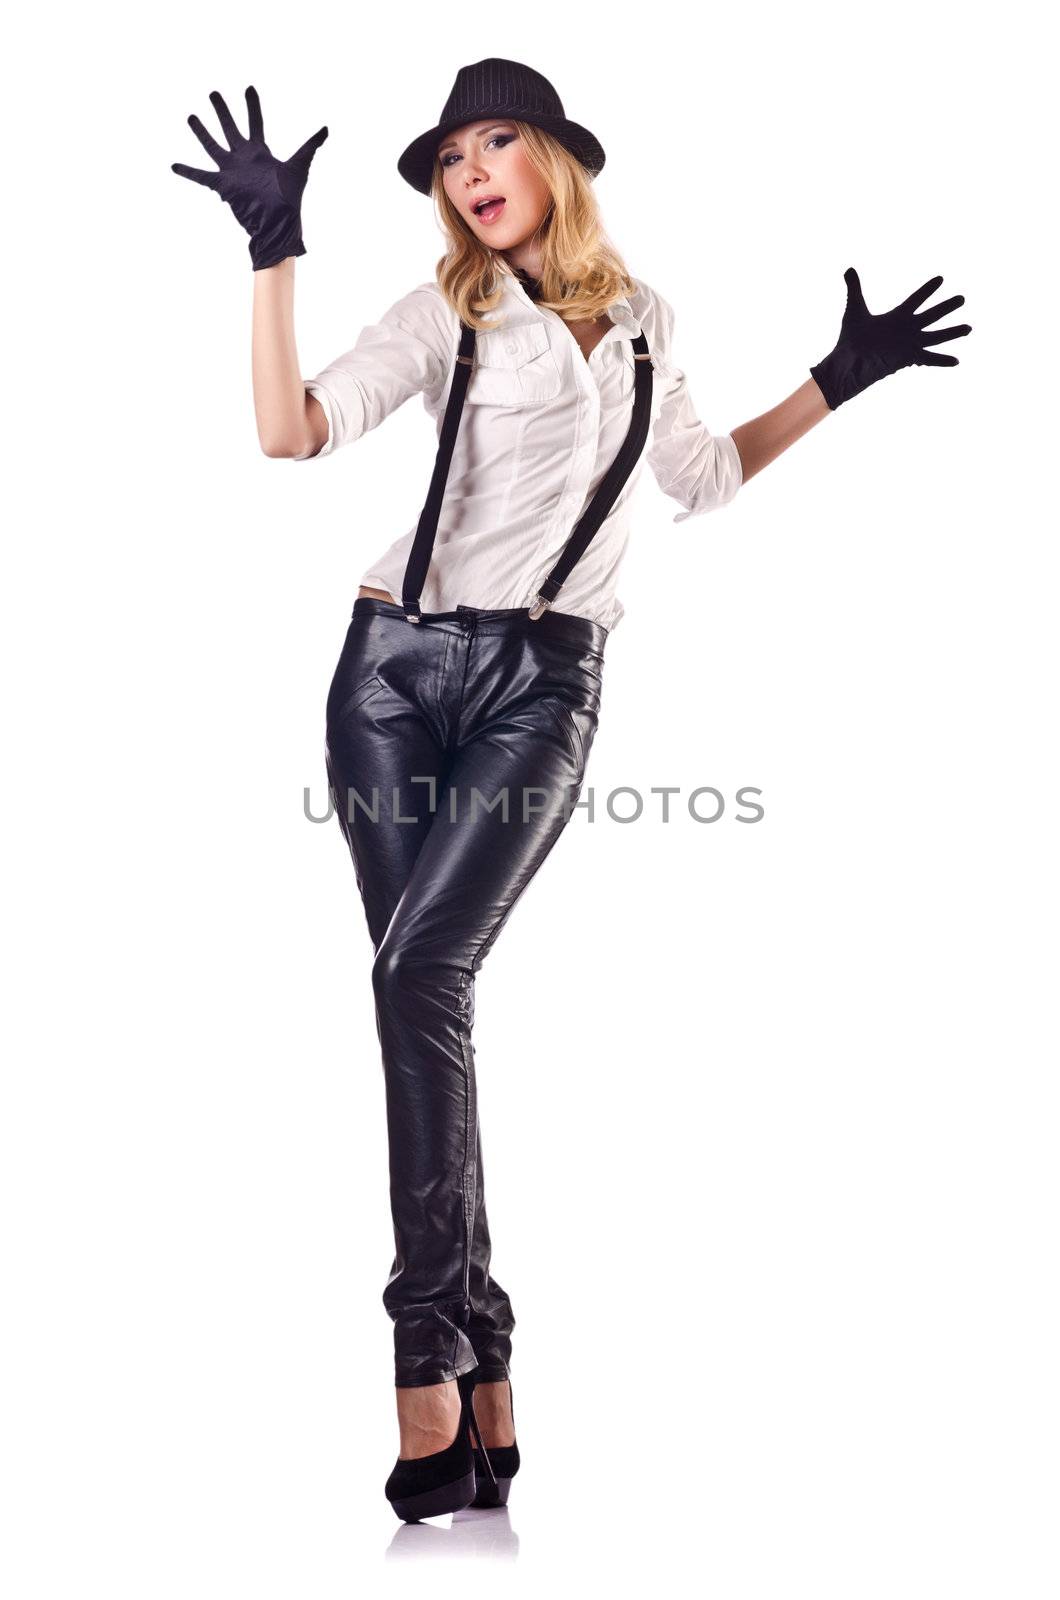 Attractive woman dancing in leather suit by Elnur